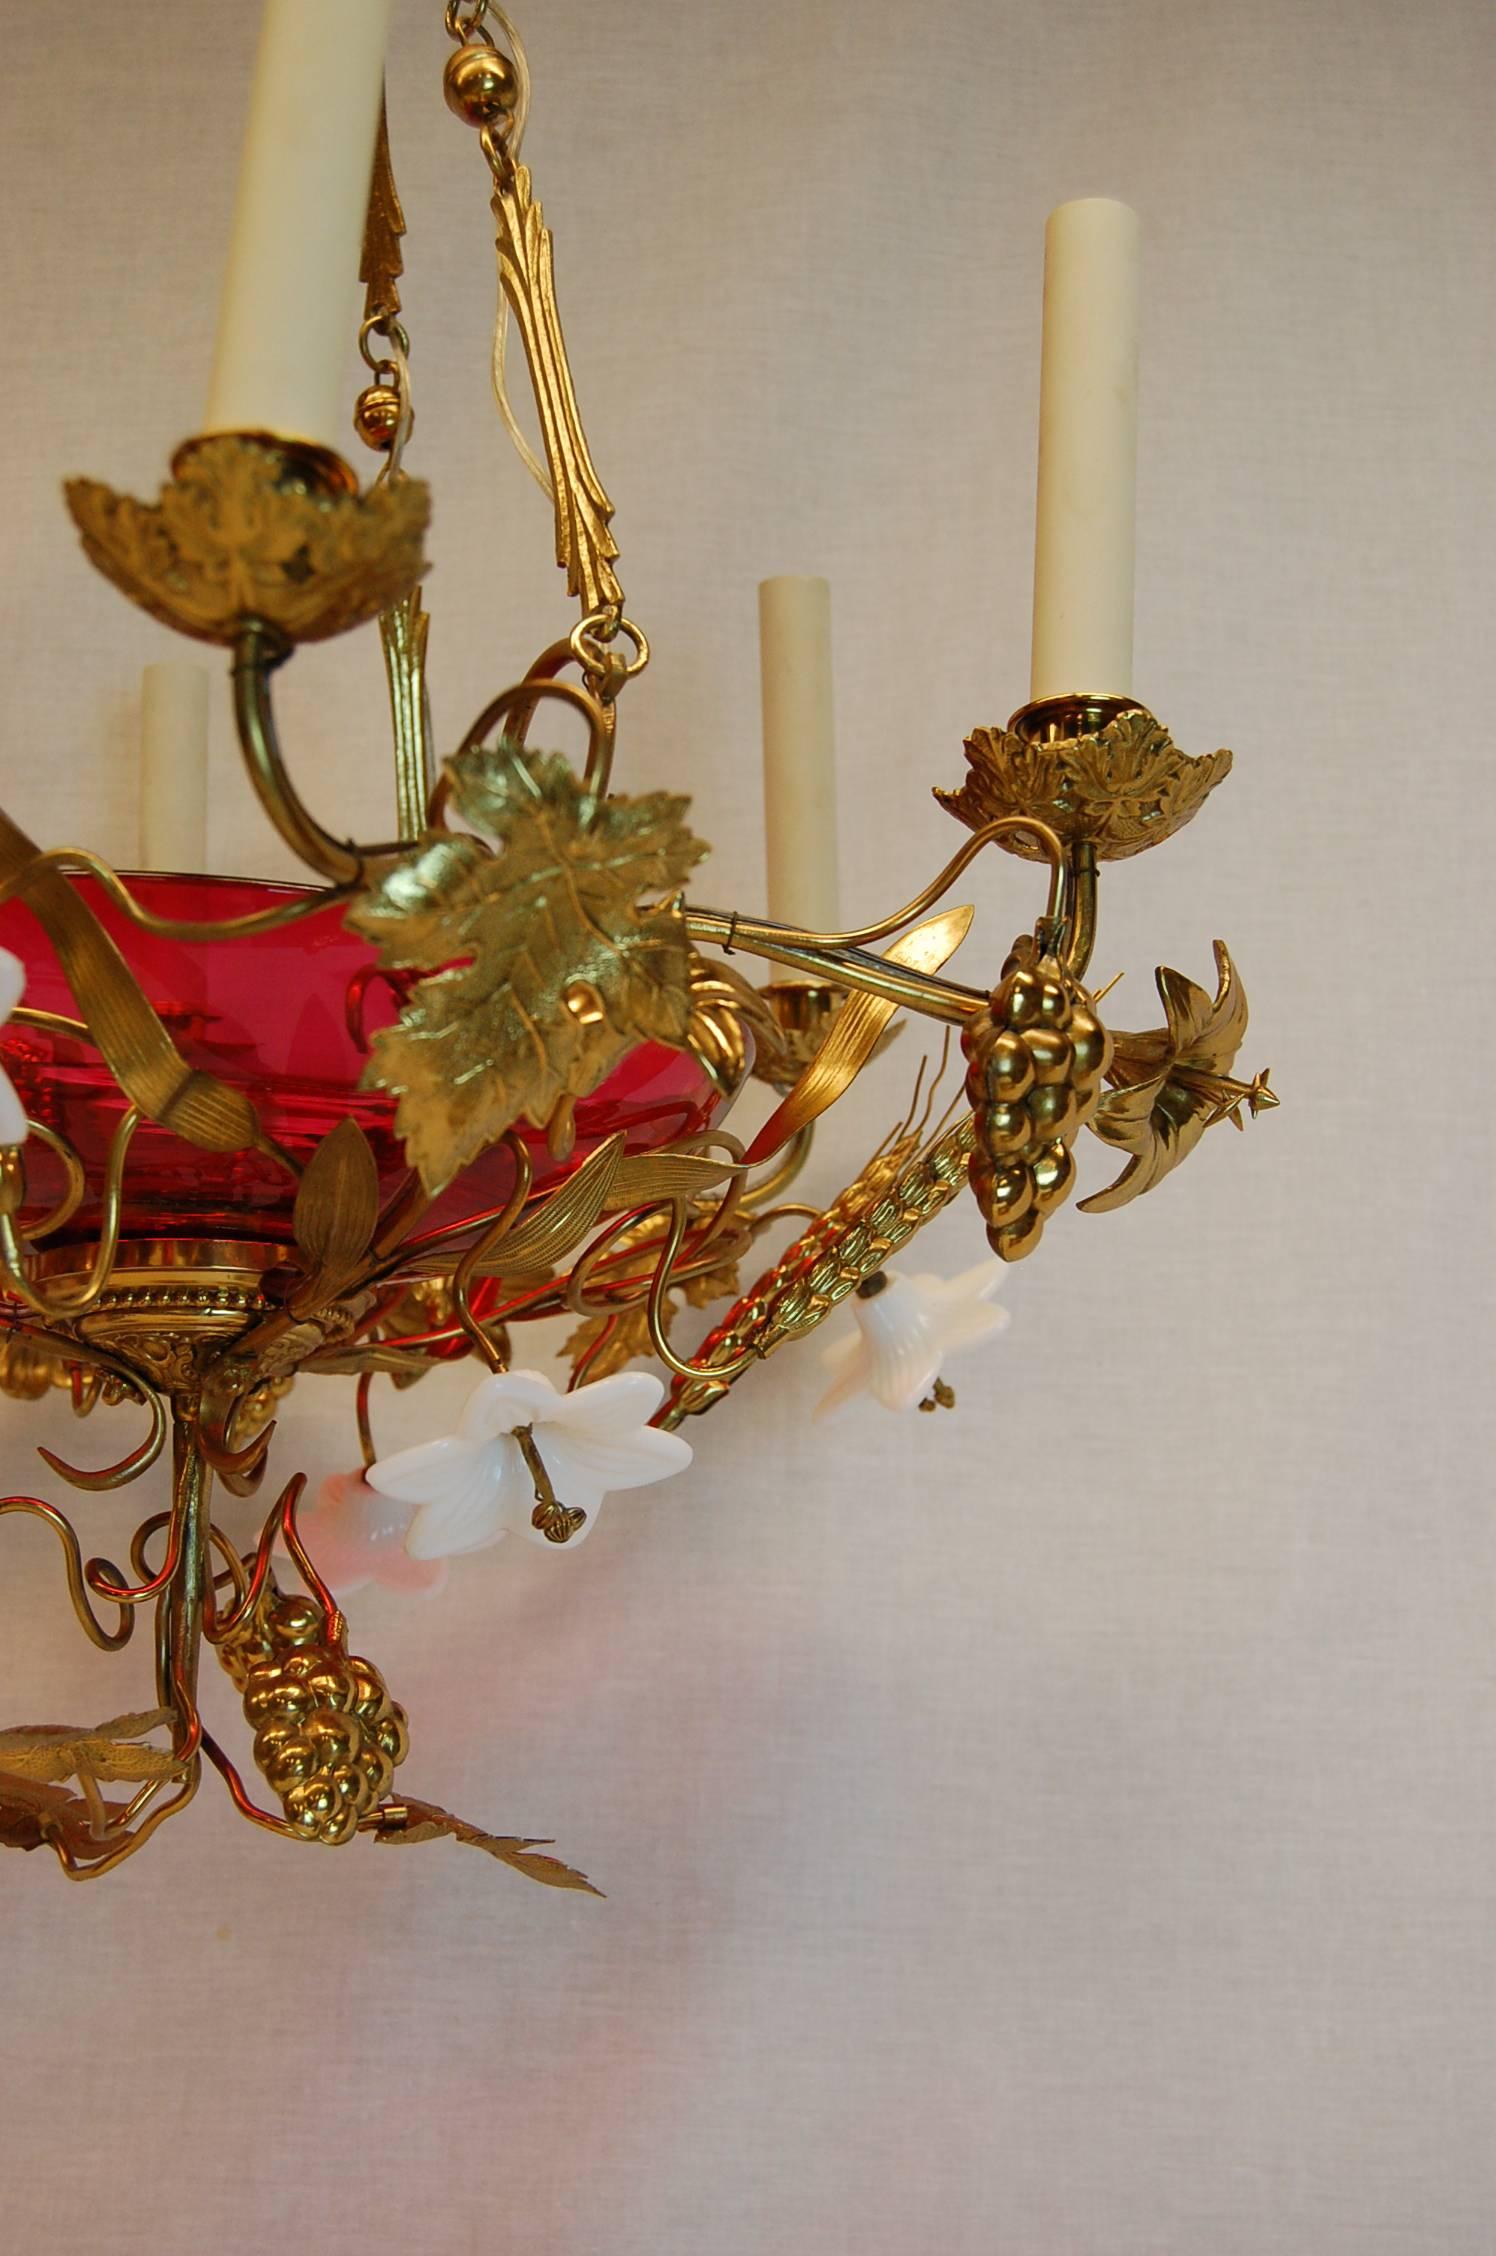 French Chandelier w/ Glass Lilies & Stamped Brass Decorations, Mid 19th Century For Sale 2